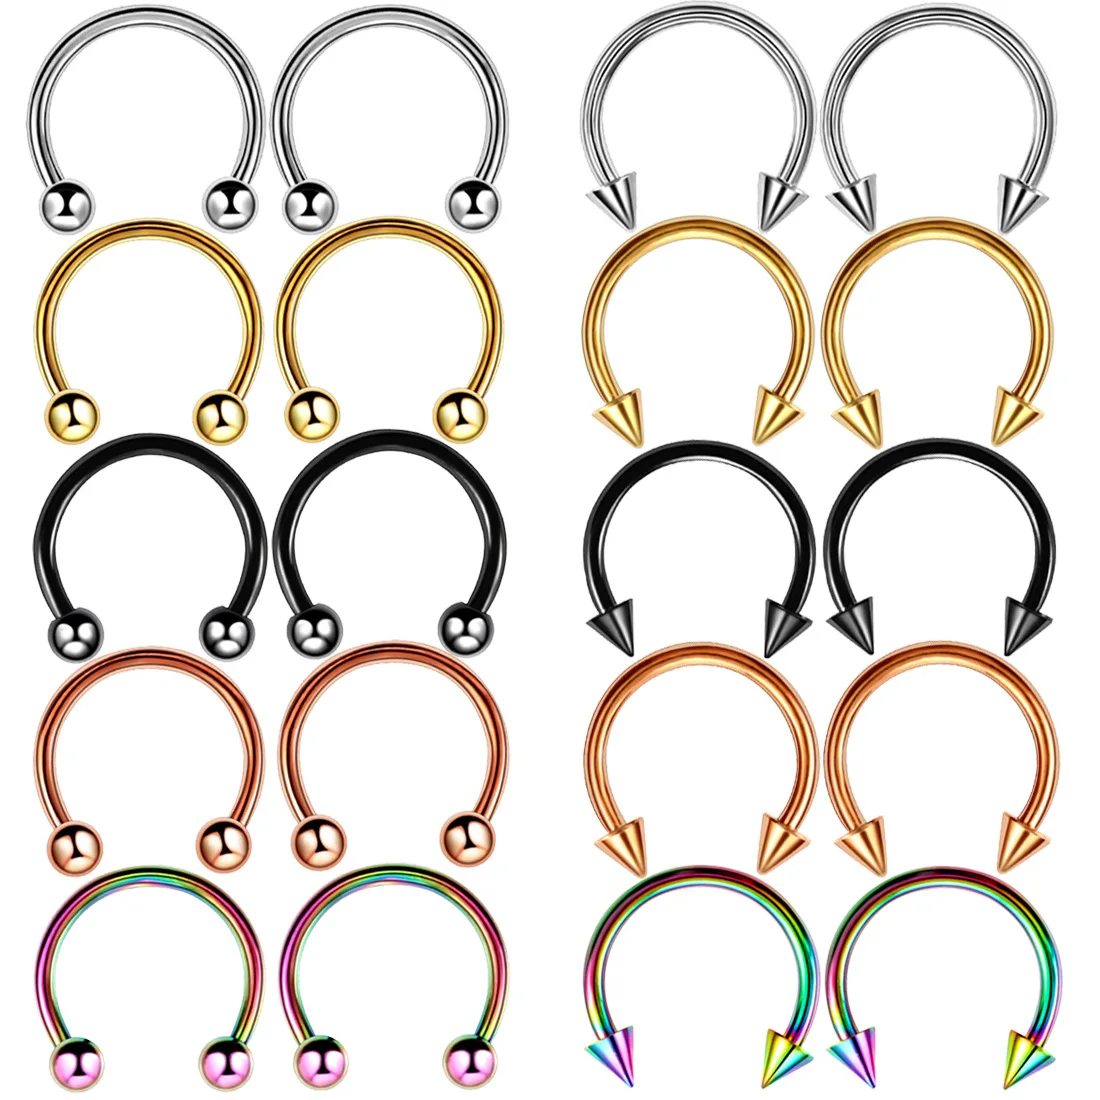 

YW Factory Nose Horseshoe Ring Nose Septum Ring Stainless Steel Circular Piercing Ear Cartilage Tragus Body Jewelry Piercing